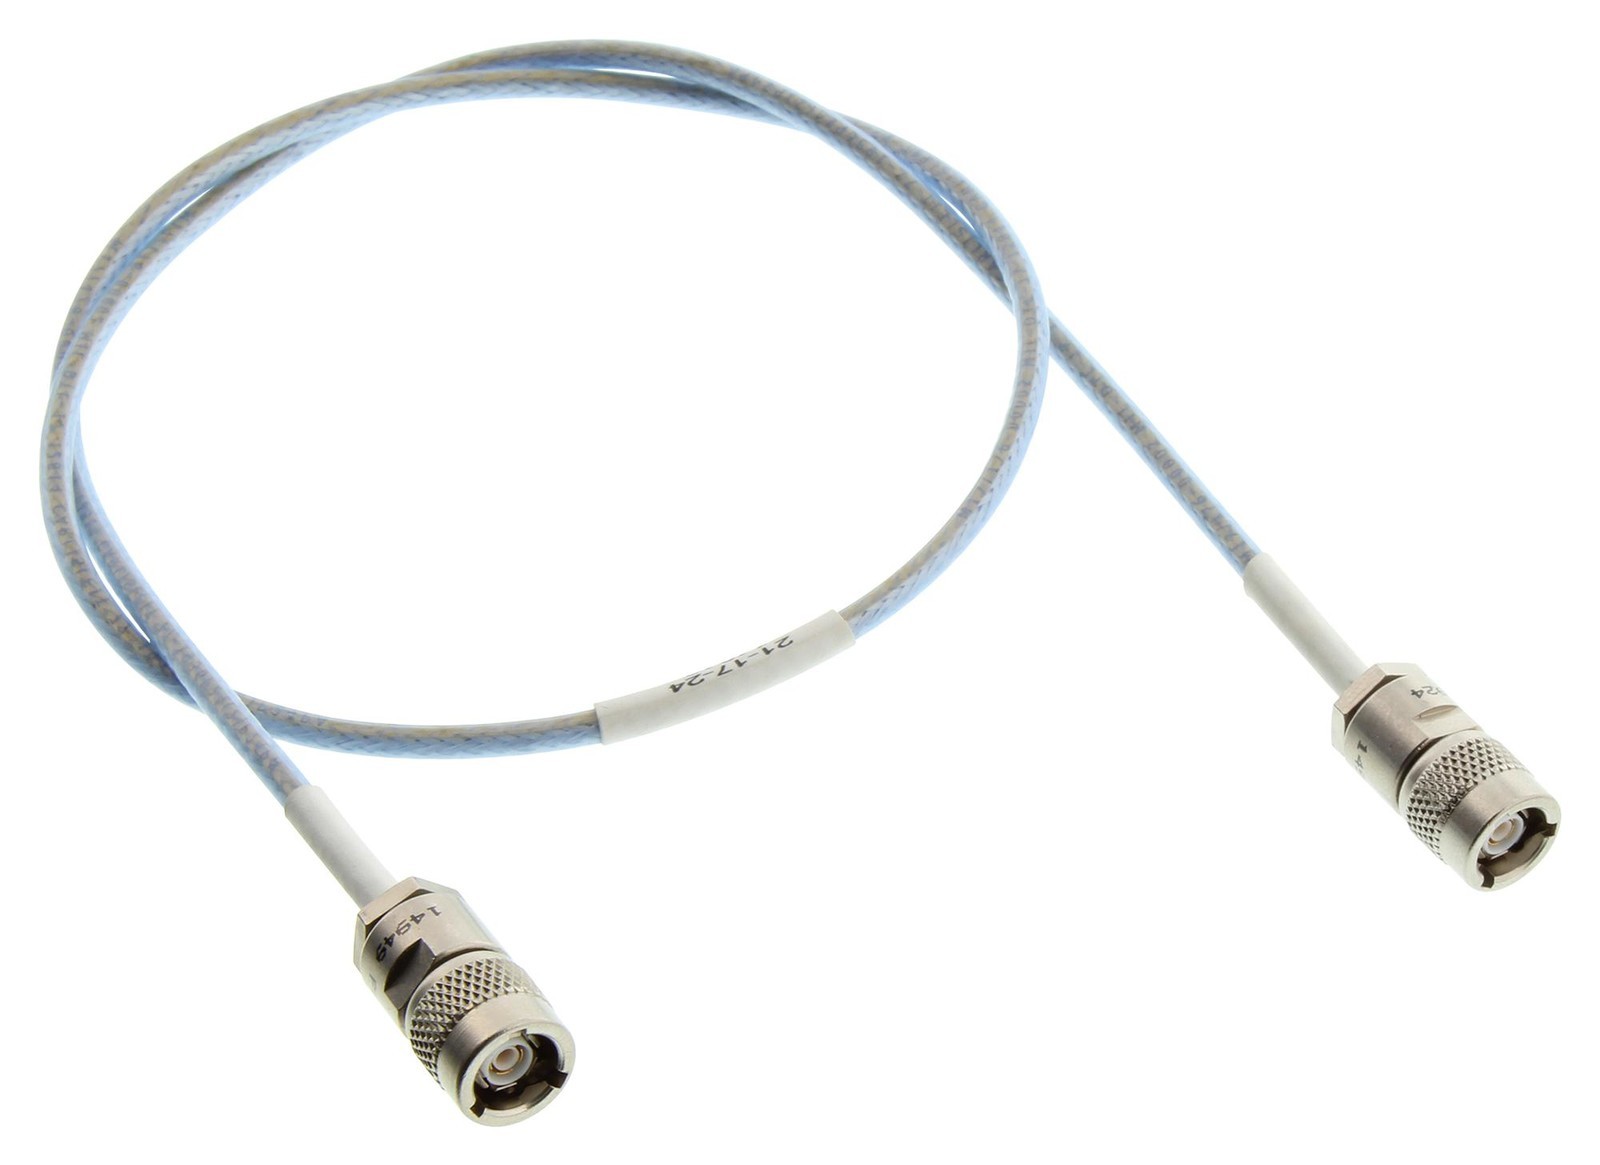 Trompeter Cinch Connectivity 21-17-24 Trs / Trs, M17/176 Cable, 24 Inches 26Ah1136